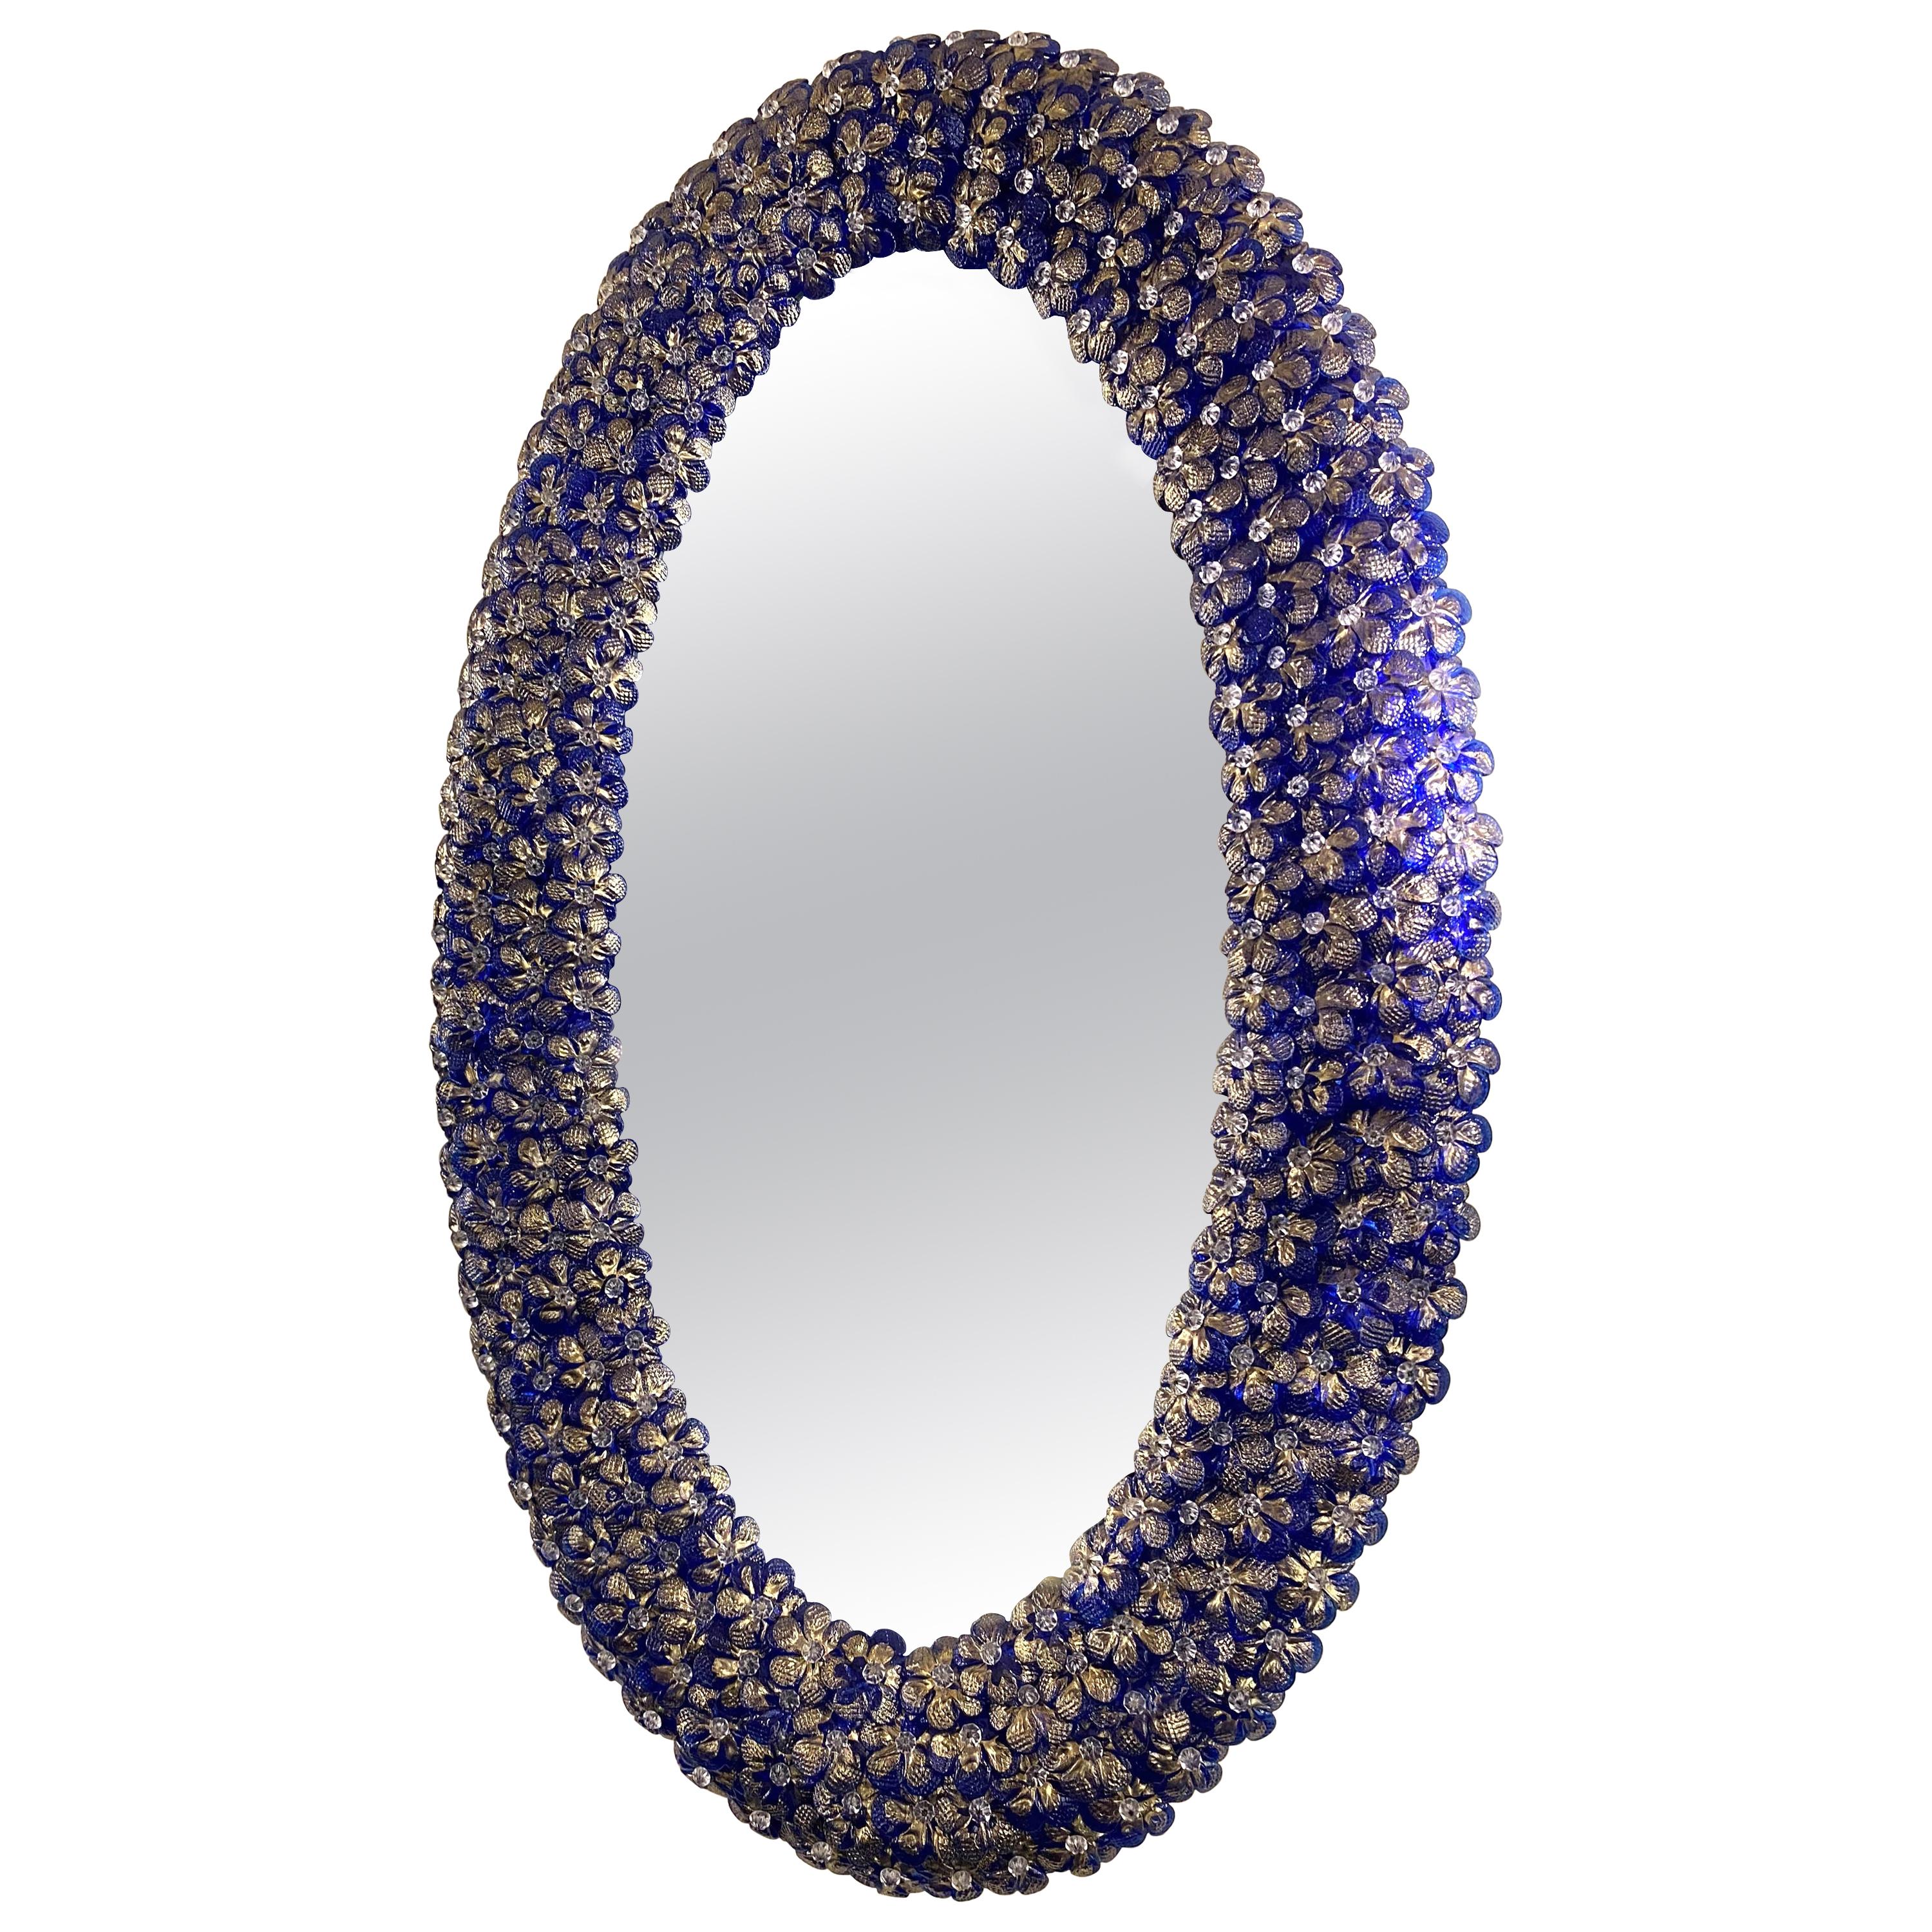 Delicious Blu Flower Oval Shaped Murano Glass Mirror For Sale